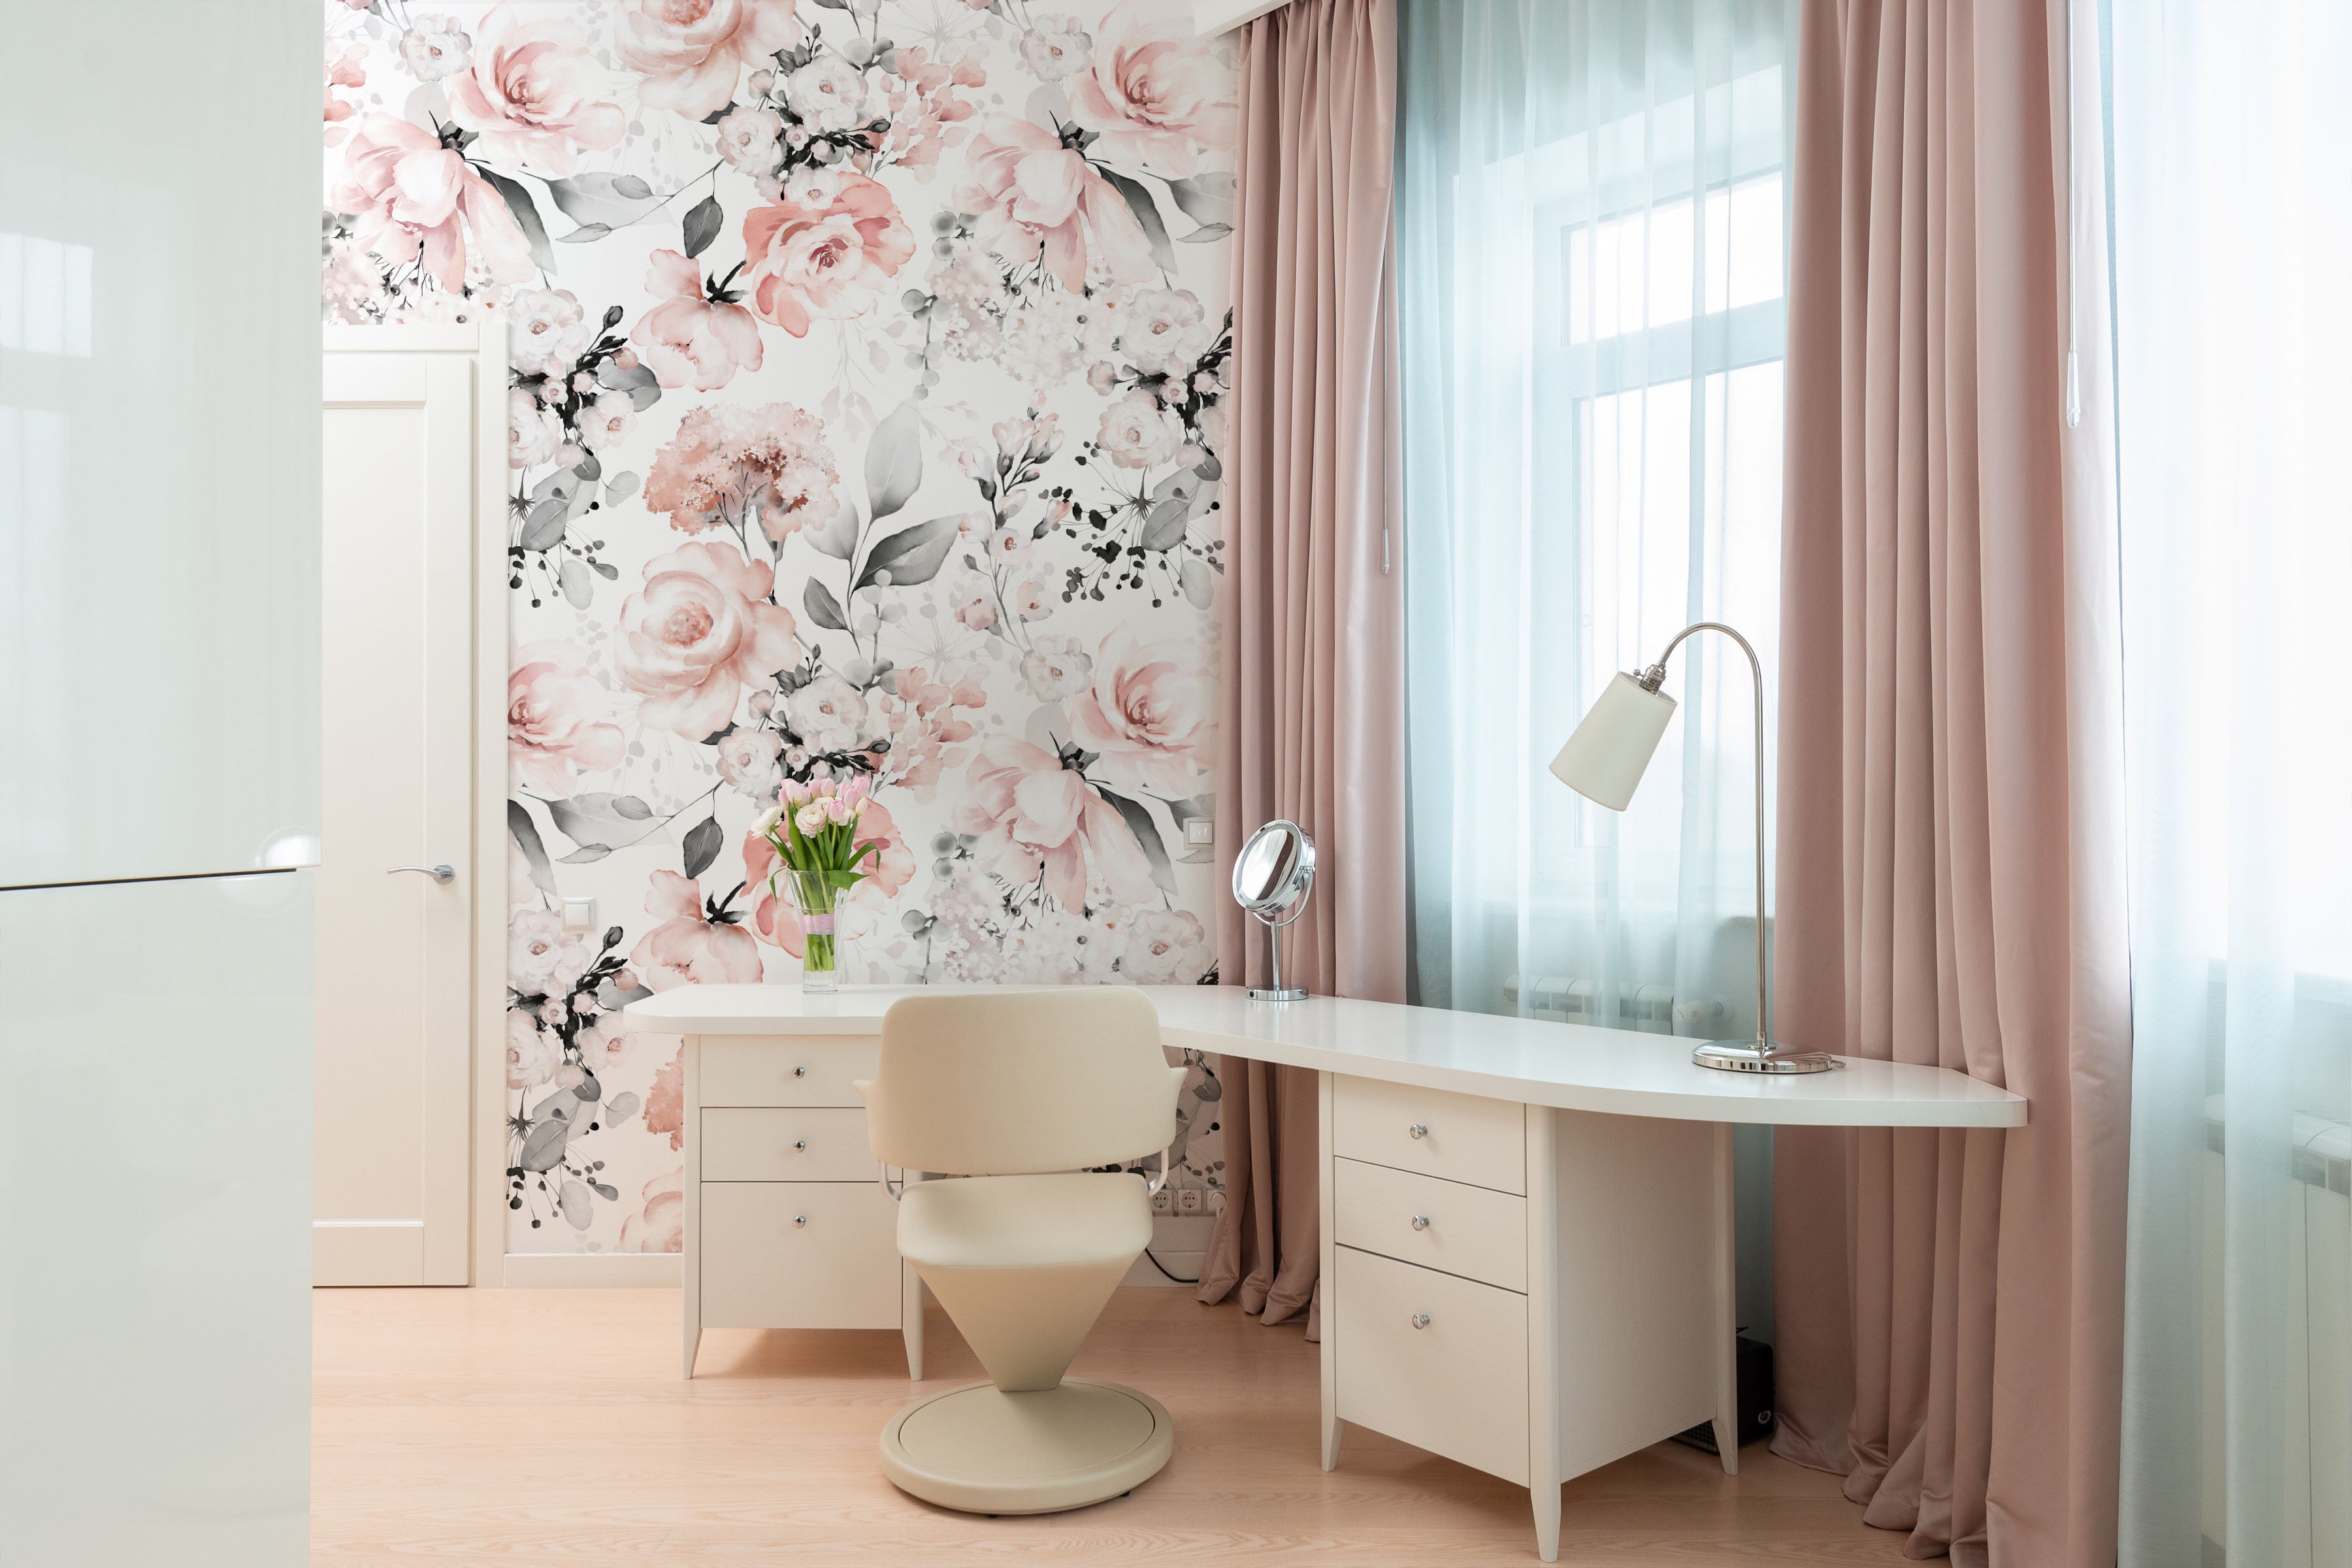 A bright and inviting beauty corner with 'Floral and Herbs Wallpaper - Pink + Black - 50"' adorning the wall. The wallpaper features large, soft pink florals and muted black herbs on a clean white background, complementing the pastel pink curtains and the modern white vanity setup with a stylish cream chair.